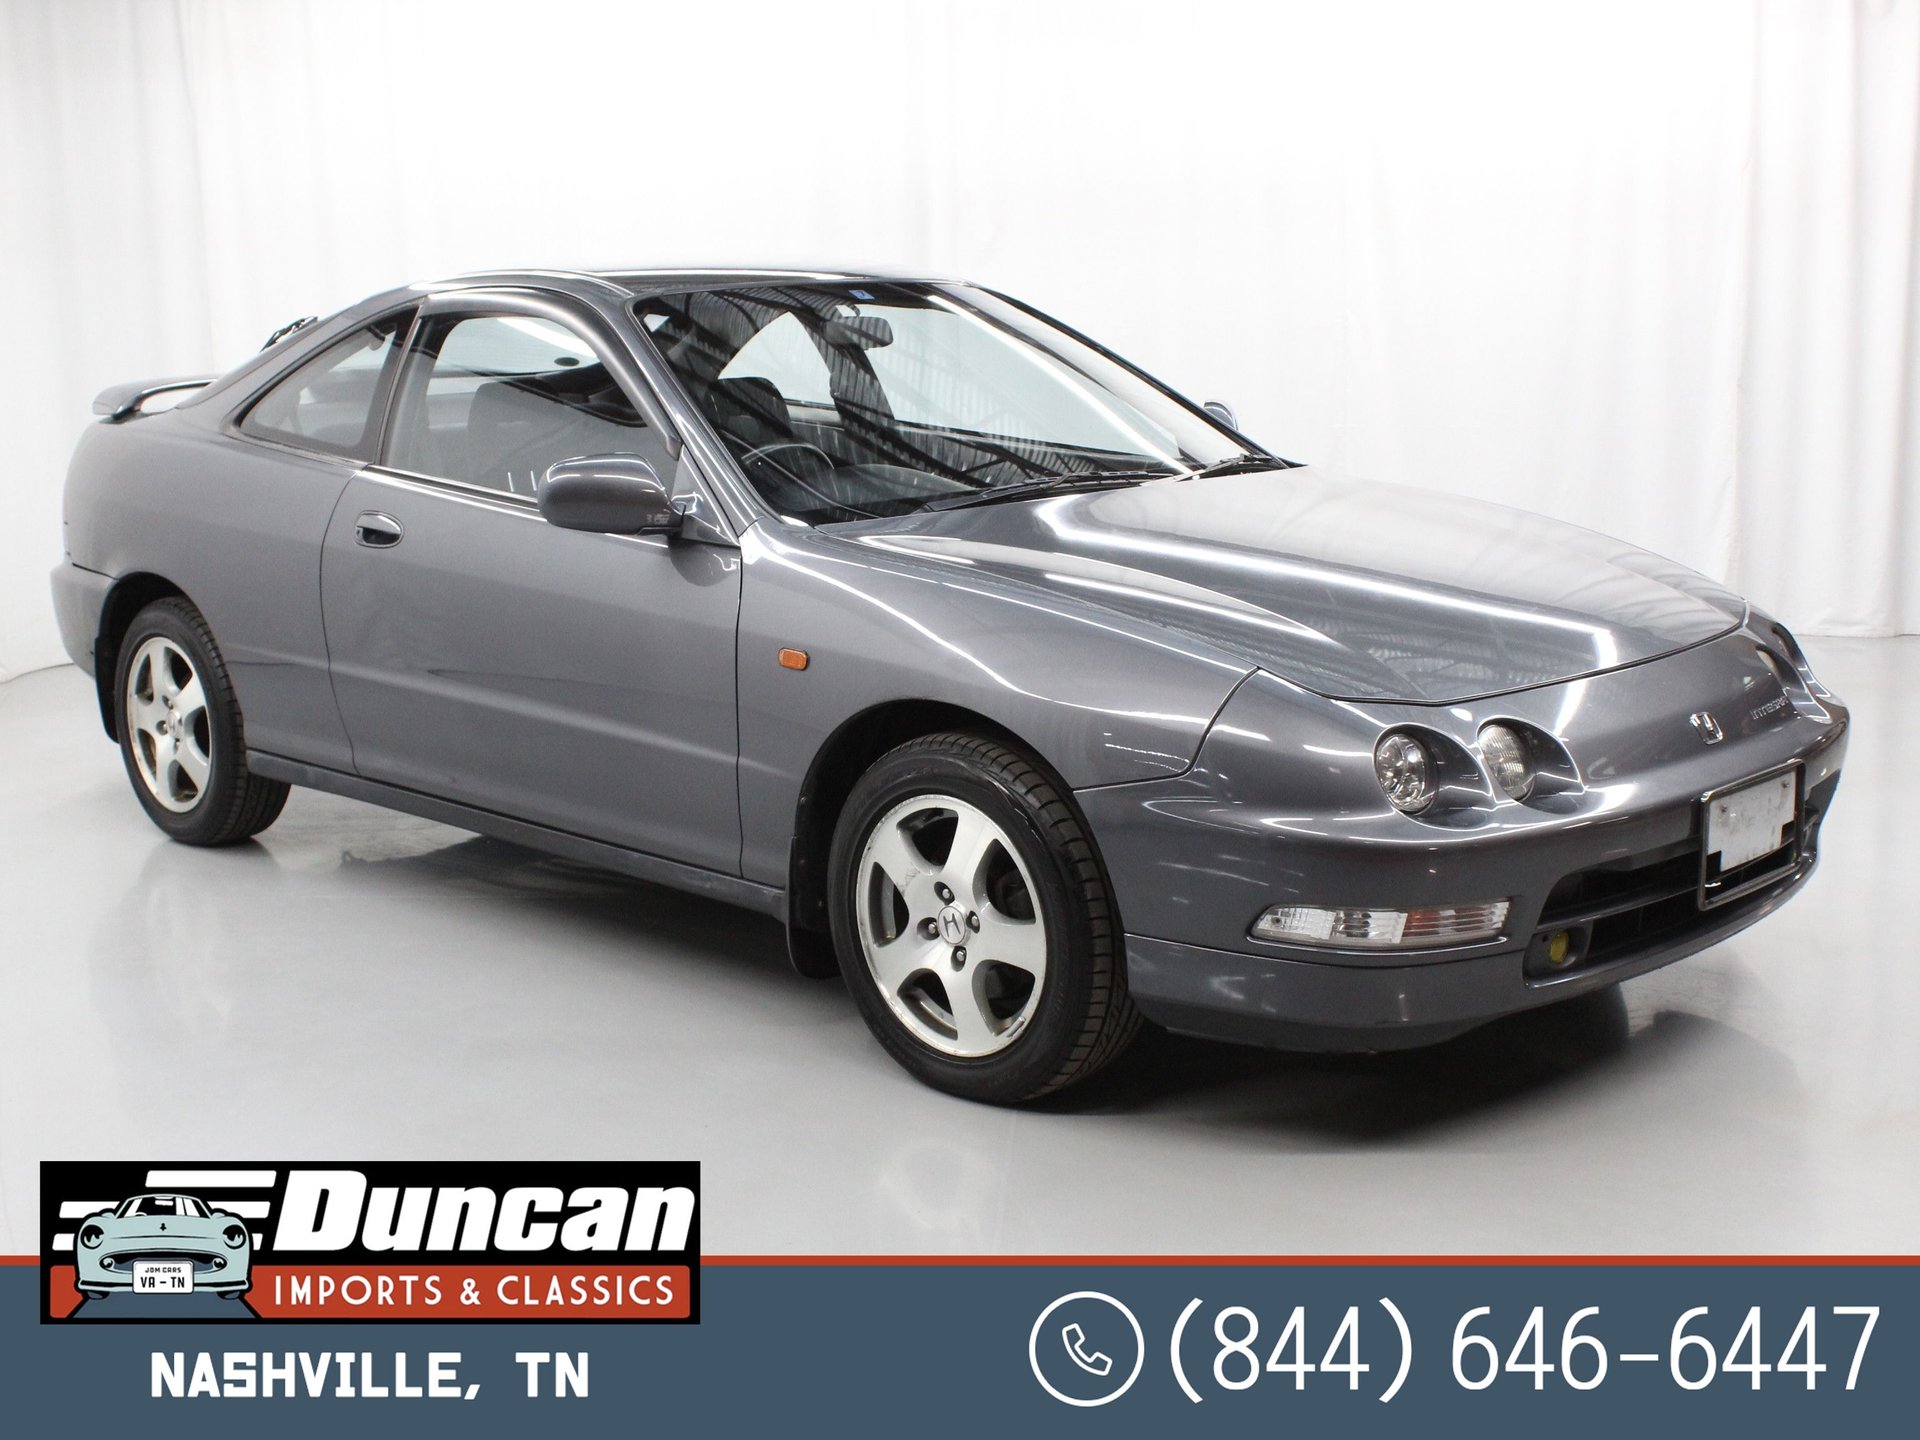 honda integra used – Search for your used car on the parking